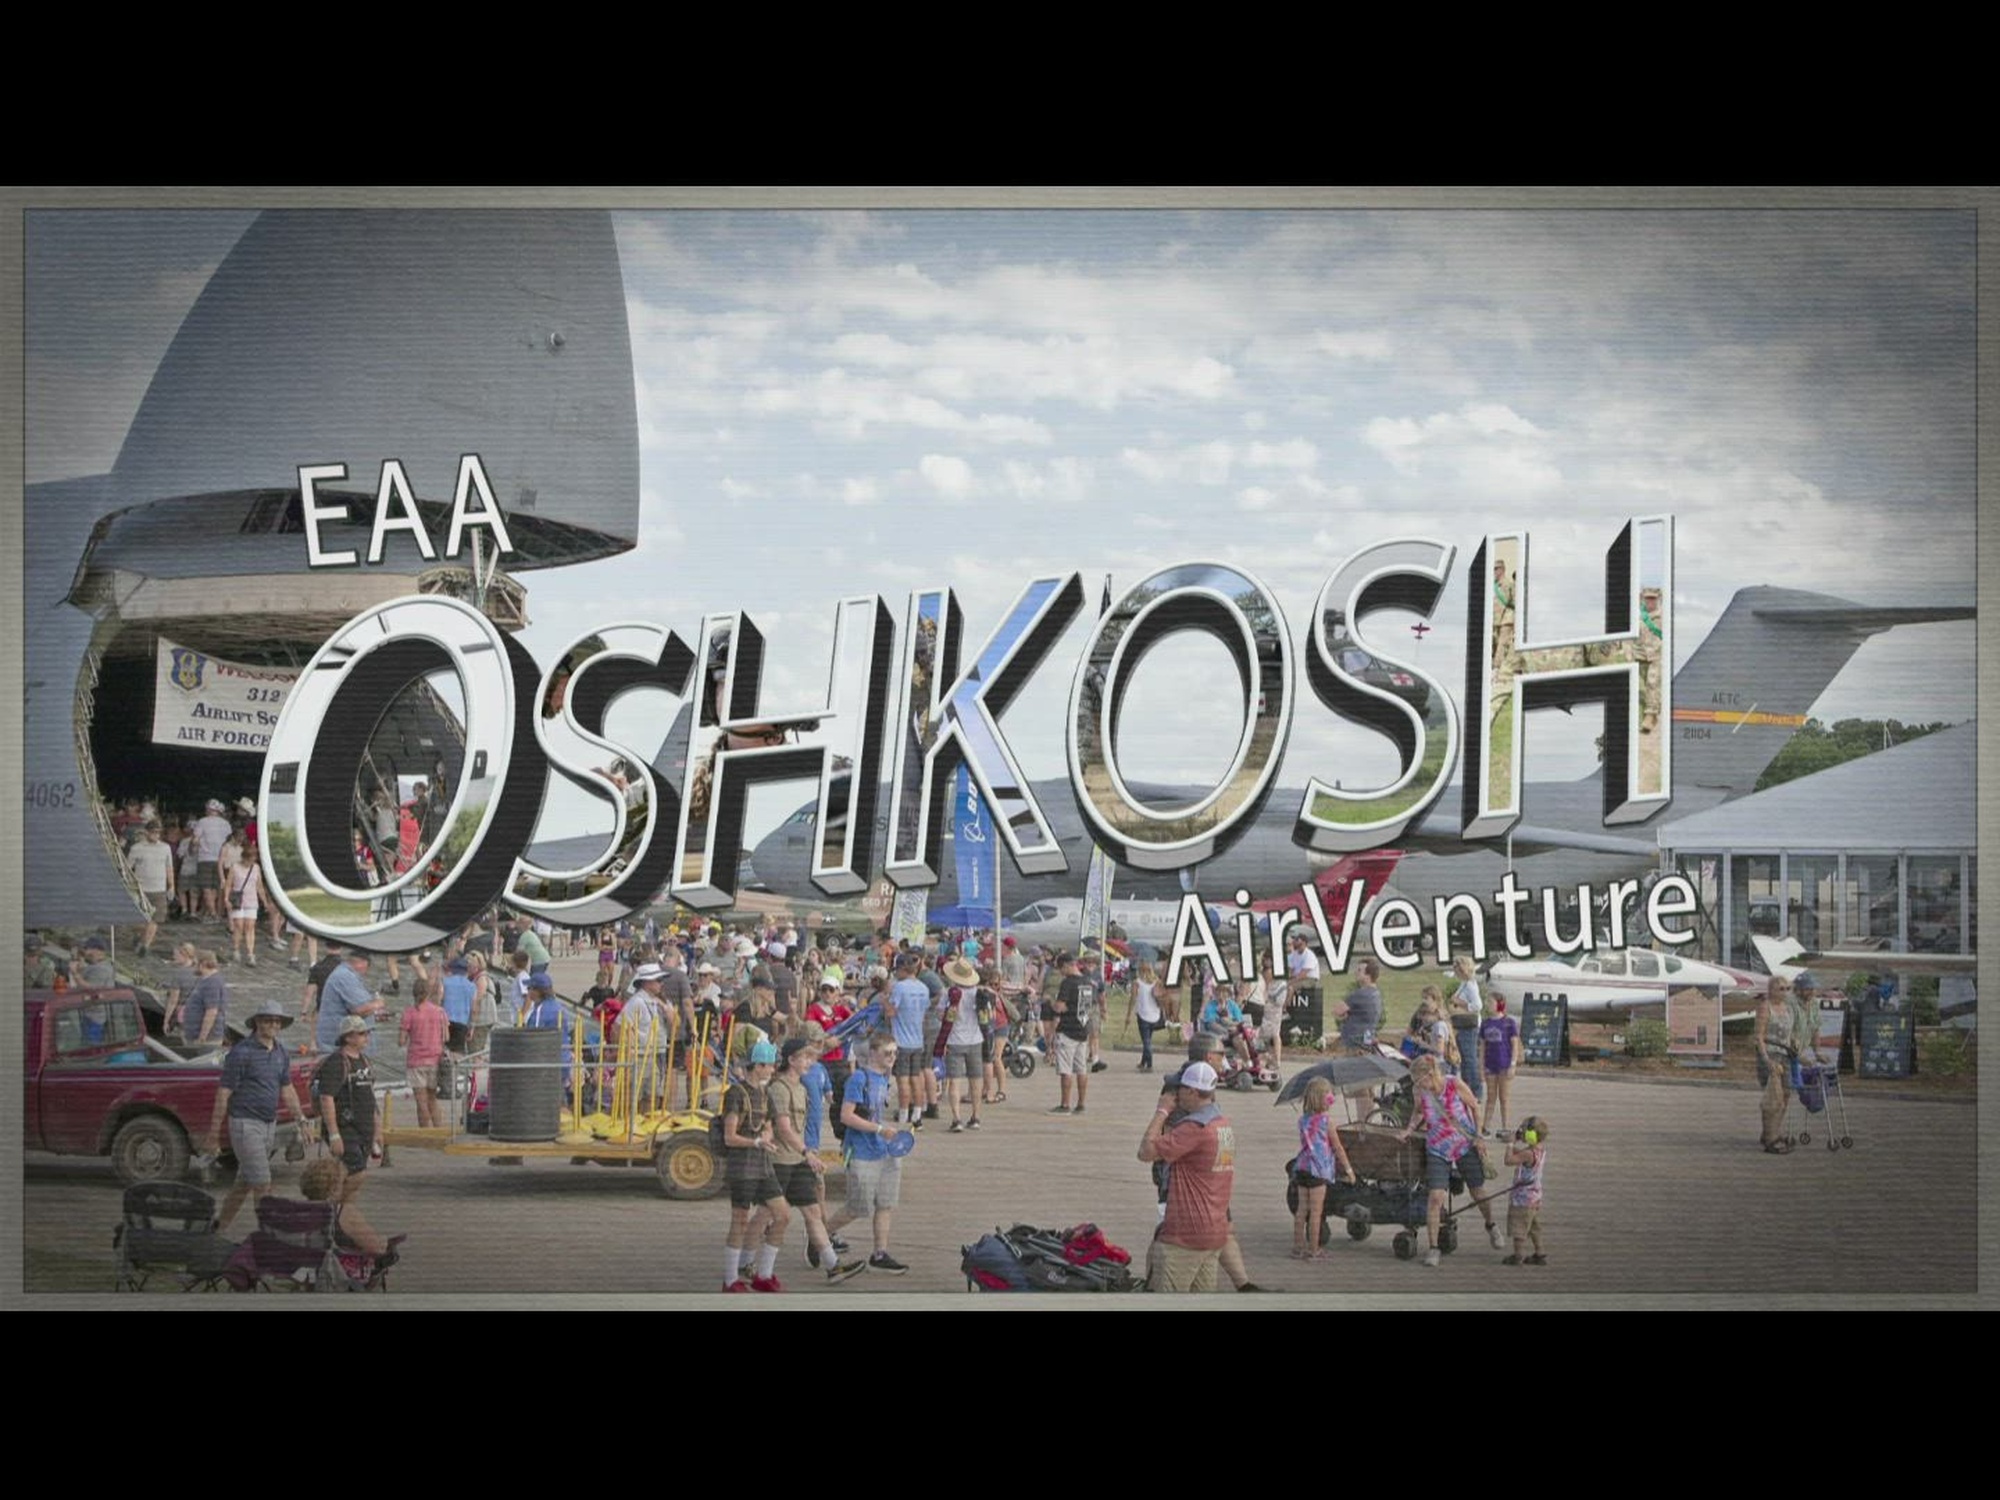 The aircraft and personnel of Air Education and Training Command, along with personnel from the 340th Flying Training Group, were among the featured attractions at EAA AirVenture Oshkosh 2023, held July 24-30 at Wittman Regional Airport in Oshkosh, Wisconsin.